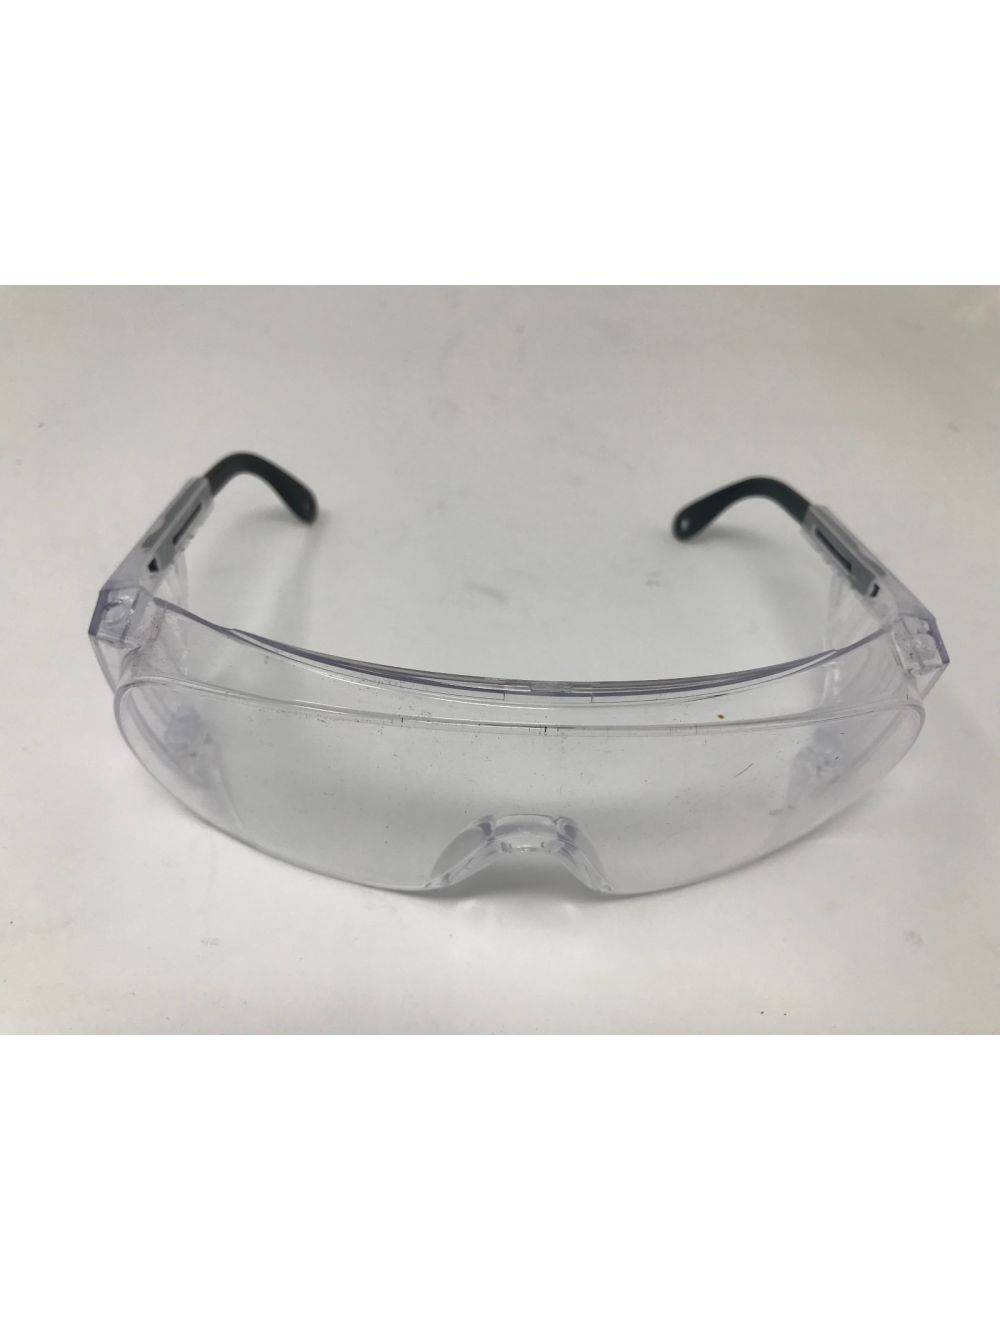 Sperian Fulcrum Series A1002 Safety Glasses 